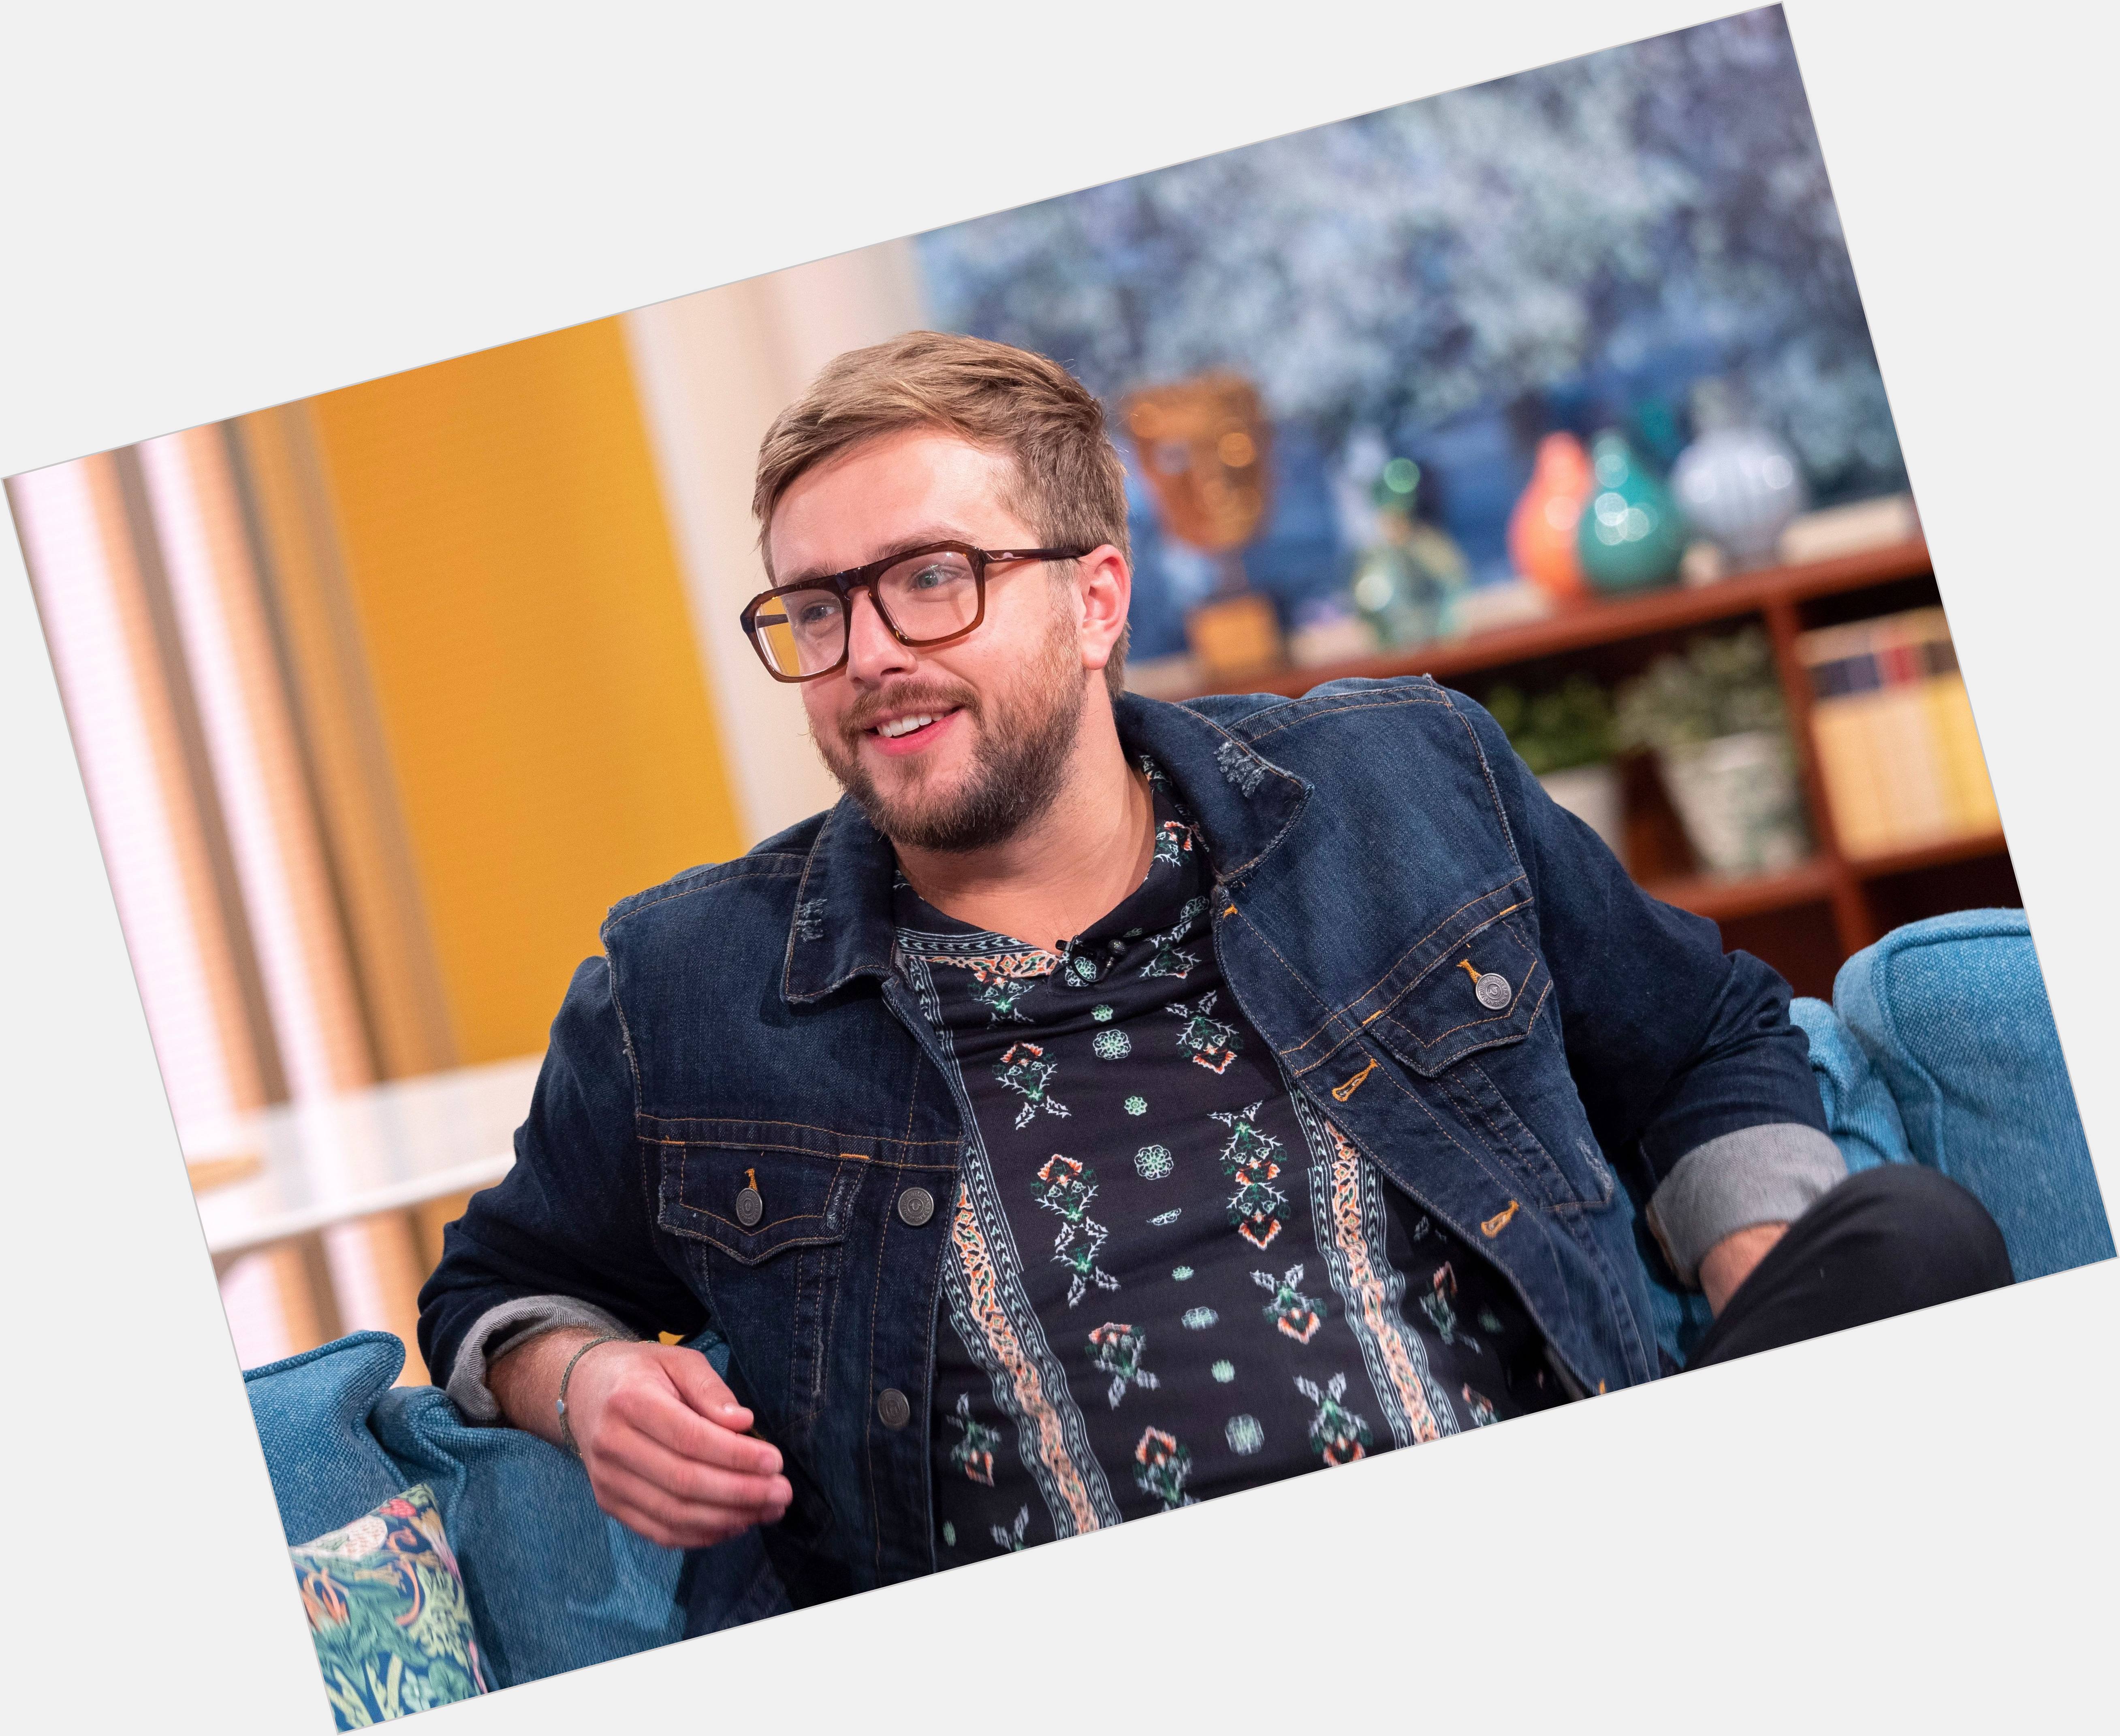 Https://fanpagepress.net/m/I/Iain Andrew Stirling New Pic 3